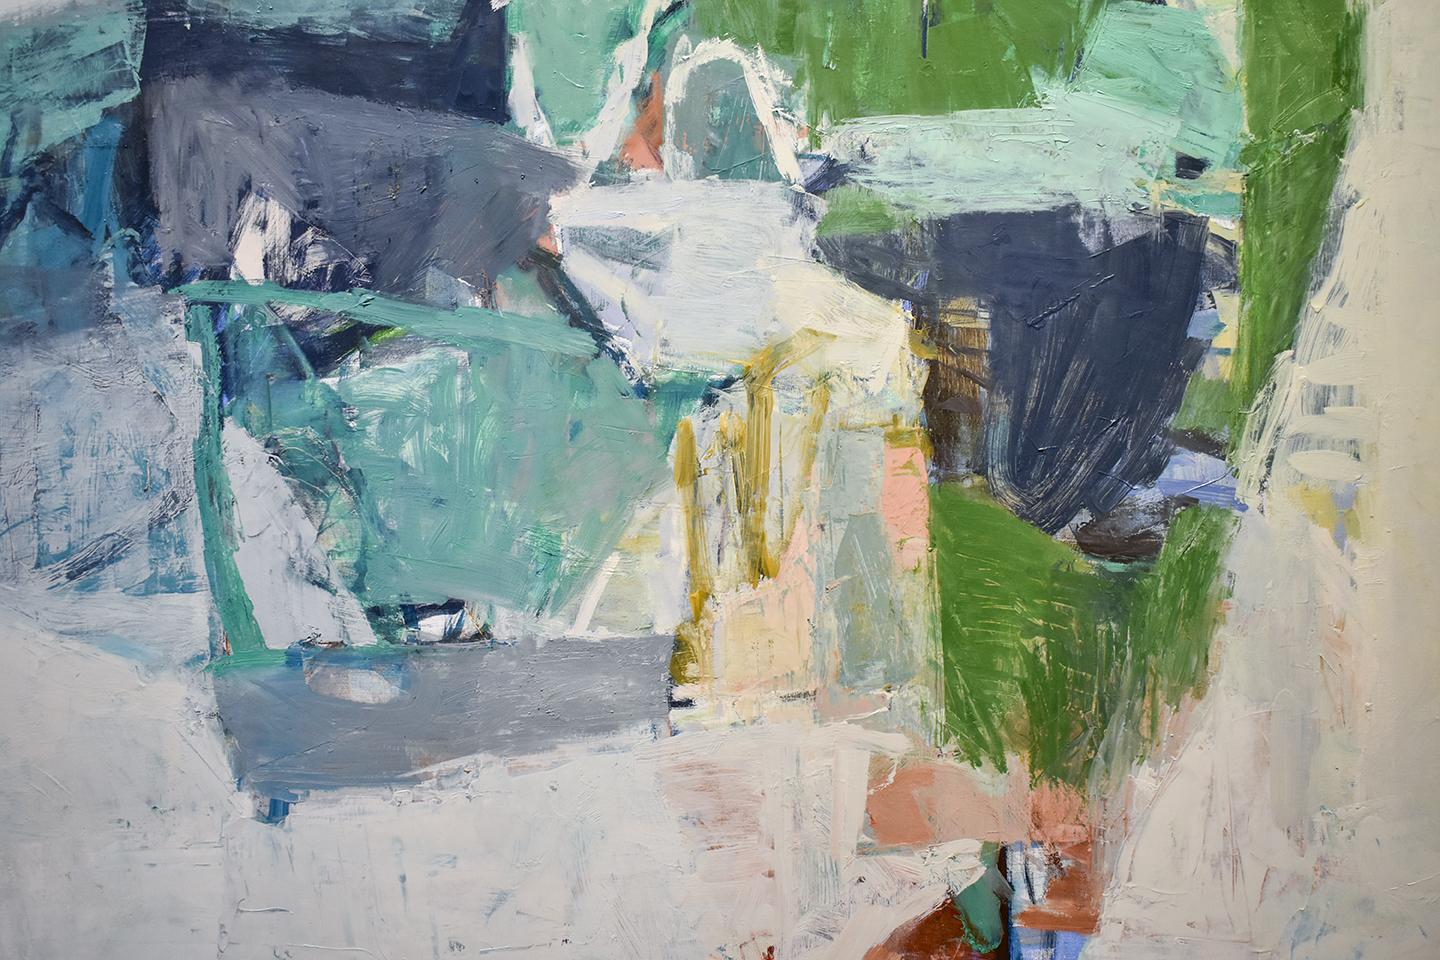 Square, abstract expressionist oil painting on canvas in aqua, teal, blue, and green against pale grey with accents of yellow, peach, and mauve
'Delta' by Jenny Nelson
Oil on linen, made in 2018
48 x 48 x 2 inches unframed 
sturdy Aluminum stretcher